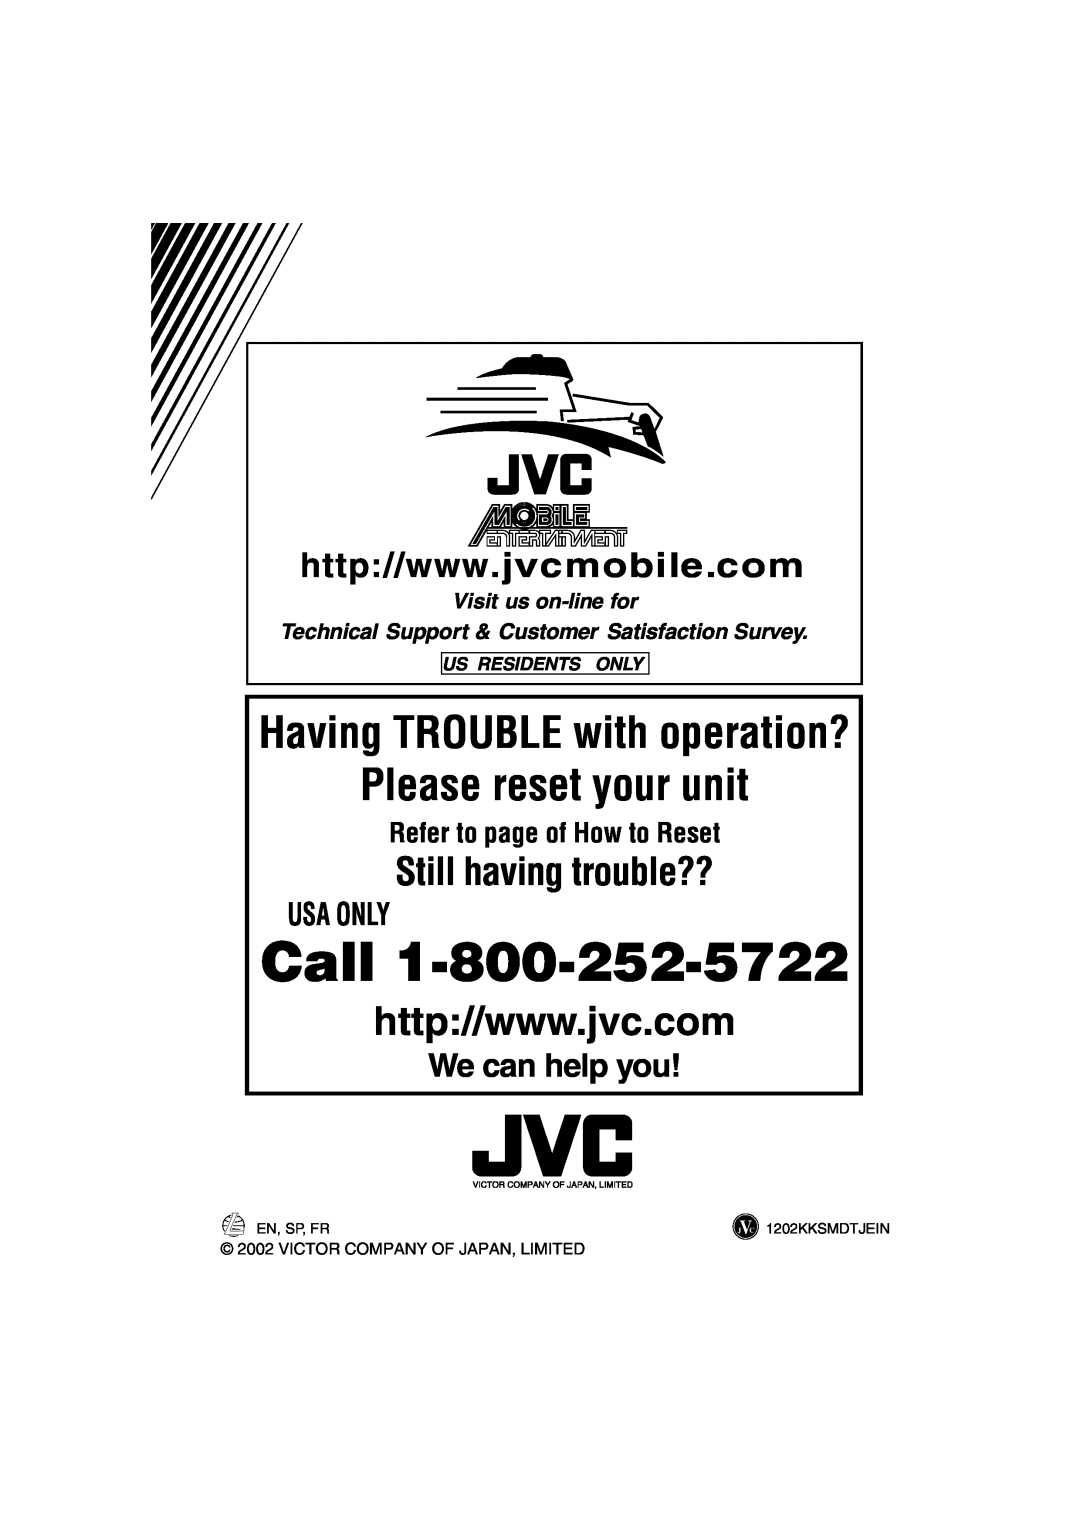 JVC KD-S790 We can help you, Visit us on-linefor, Technical Support & Customer Satisfaction Survey, Us Residents Only 